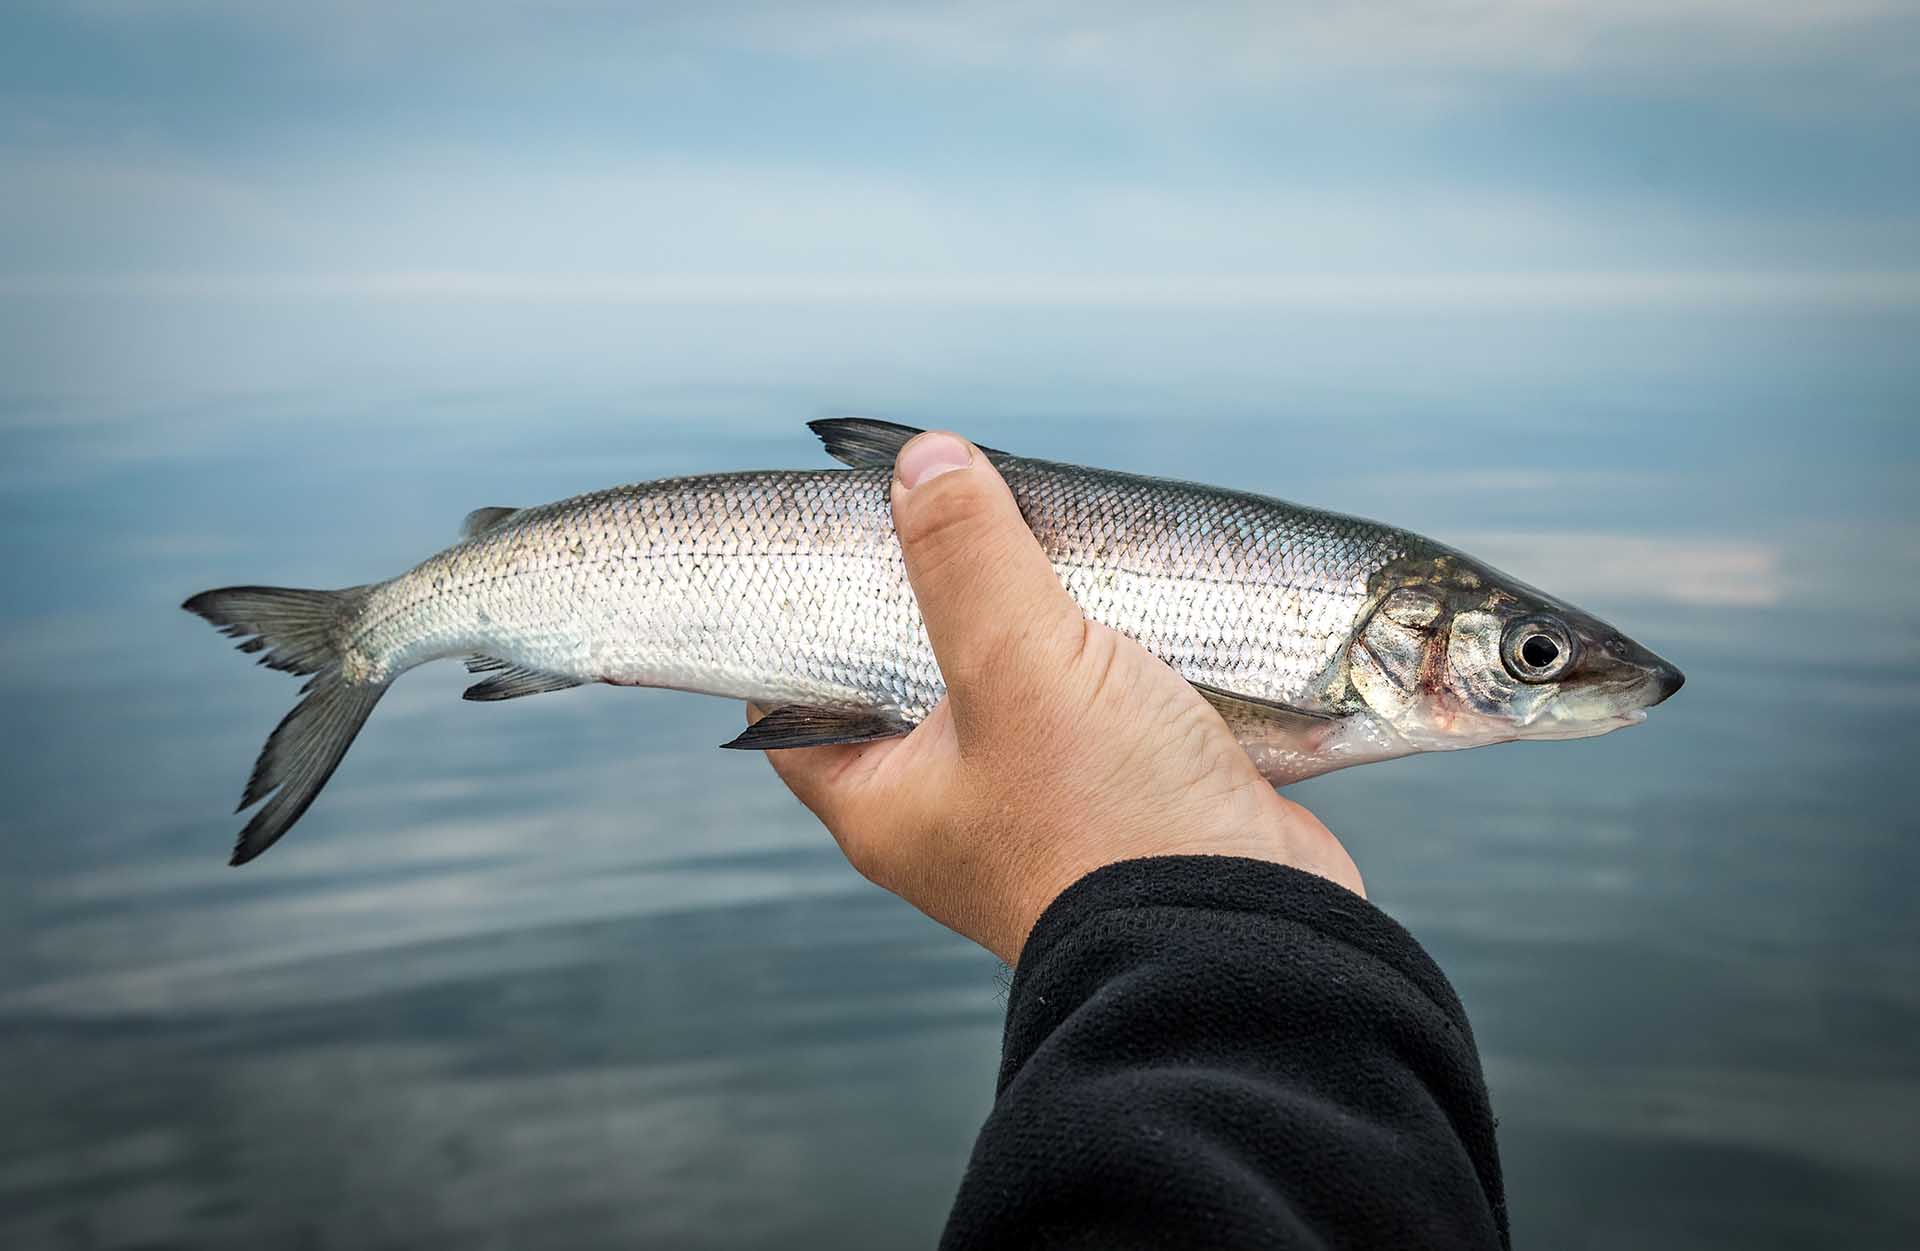 Fisherman ready to release his catch - whitefish